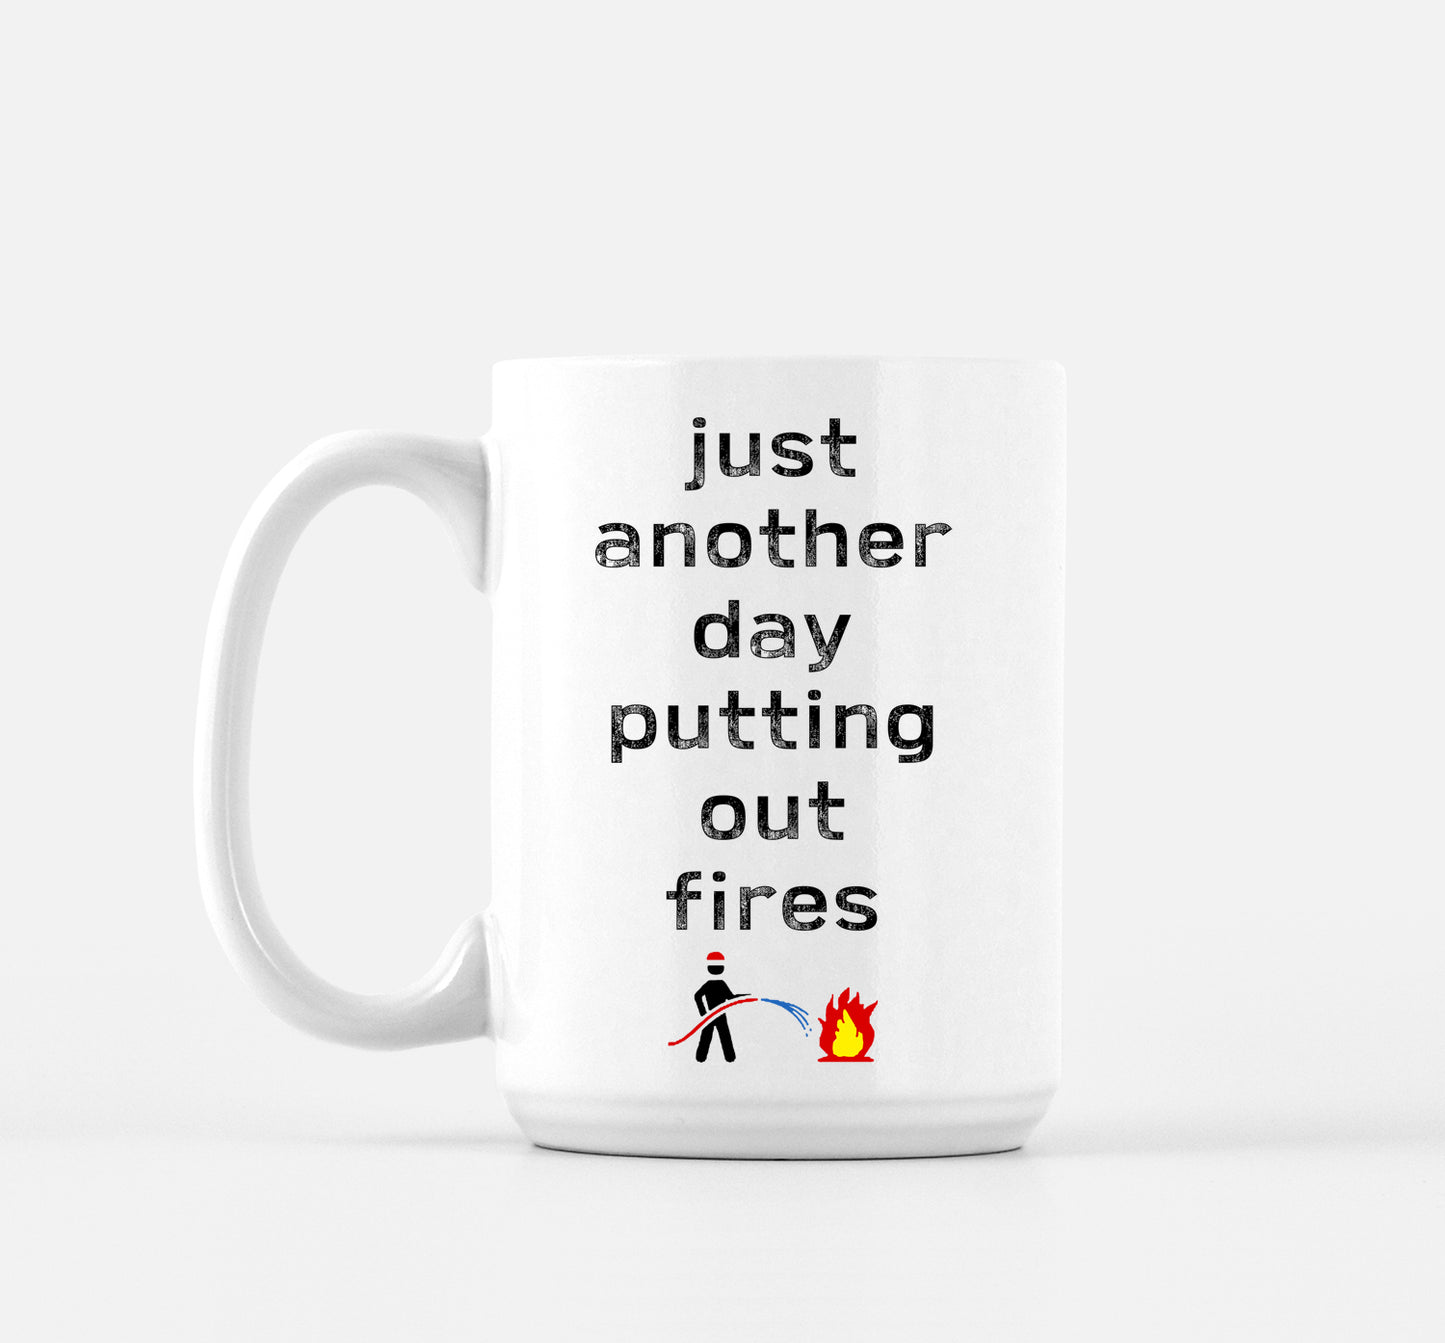 Putting Out Fires Mug by The Office Art Guy